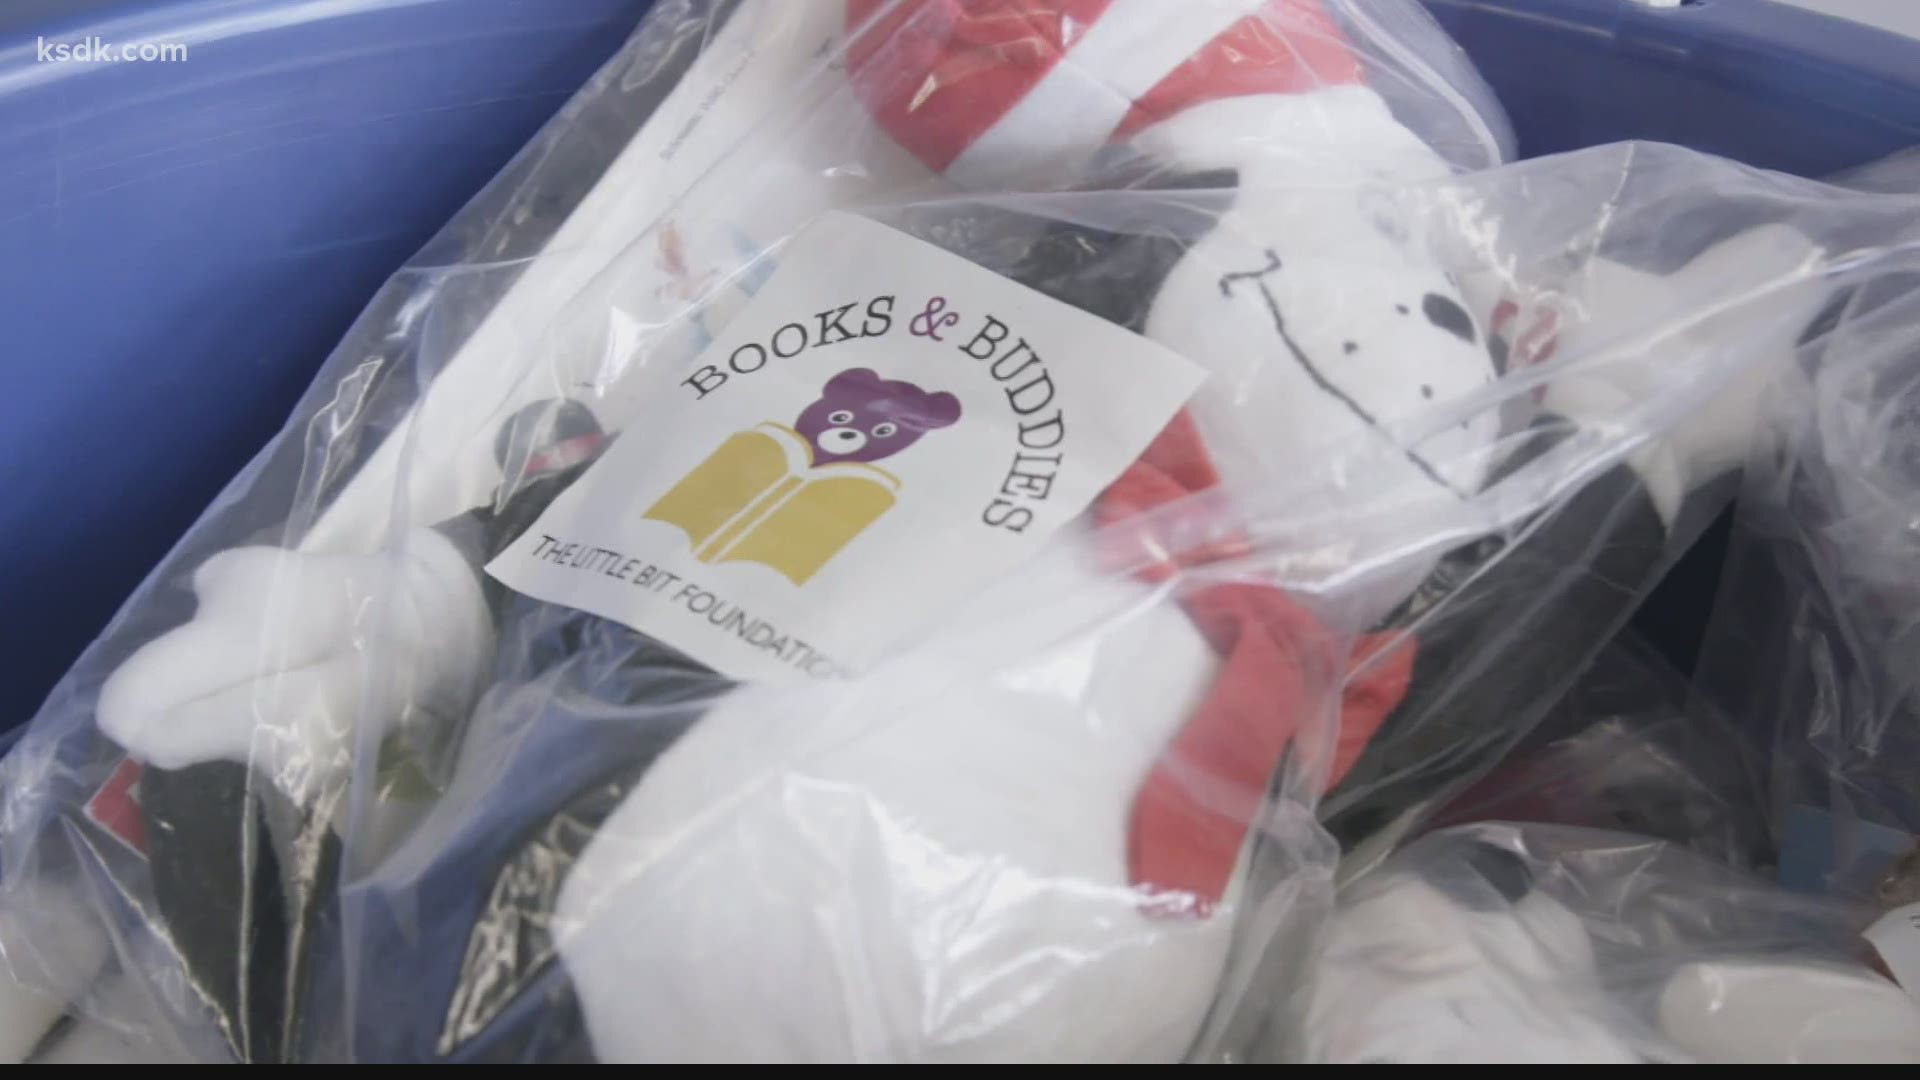 The nonprofit provides essential items to 14,000 needy kids in St. Louis.